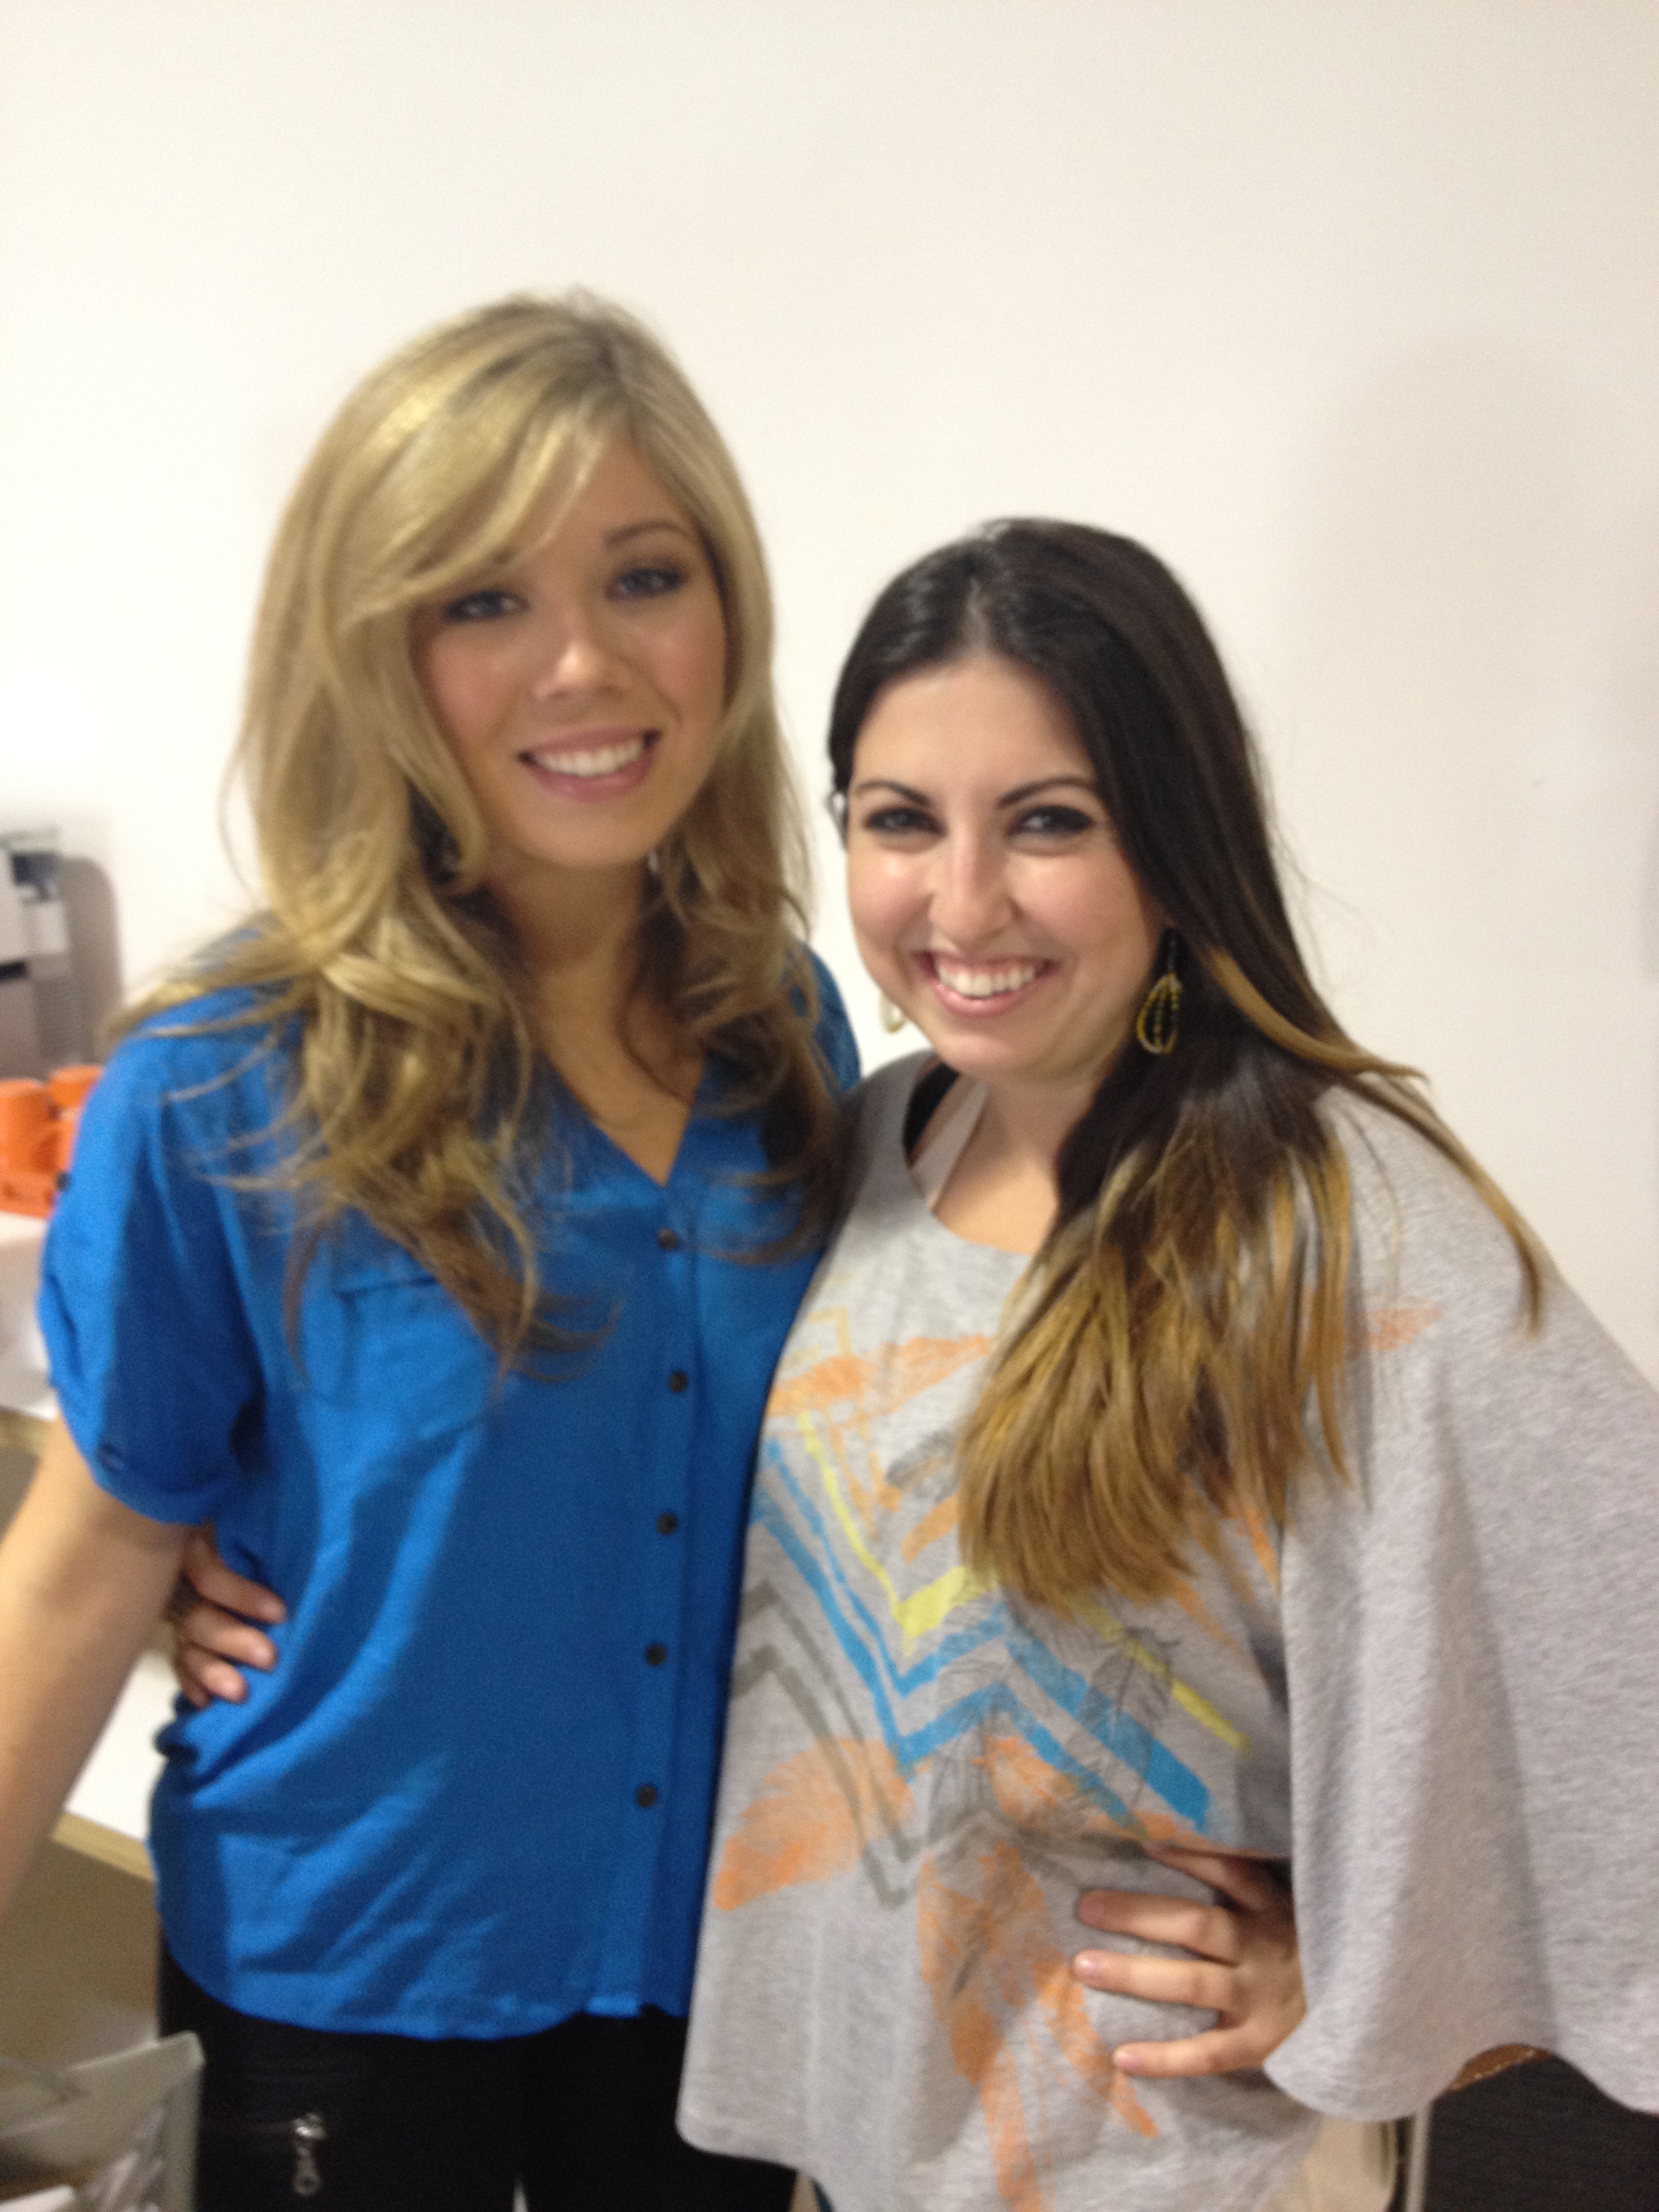 Lunchables event with Jennette McCurdy